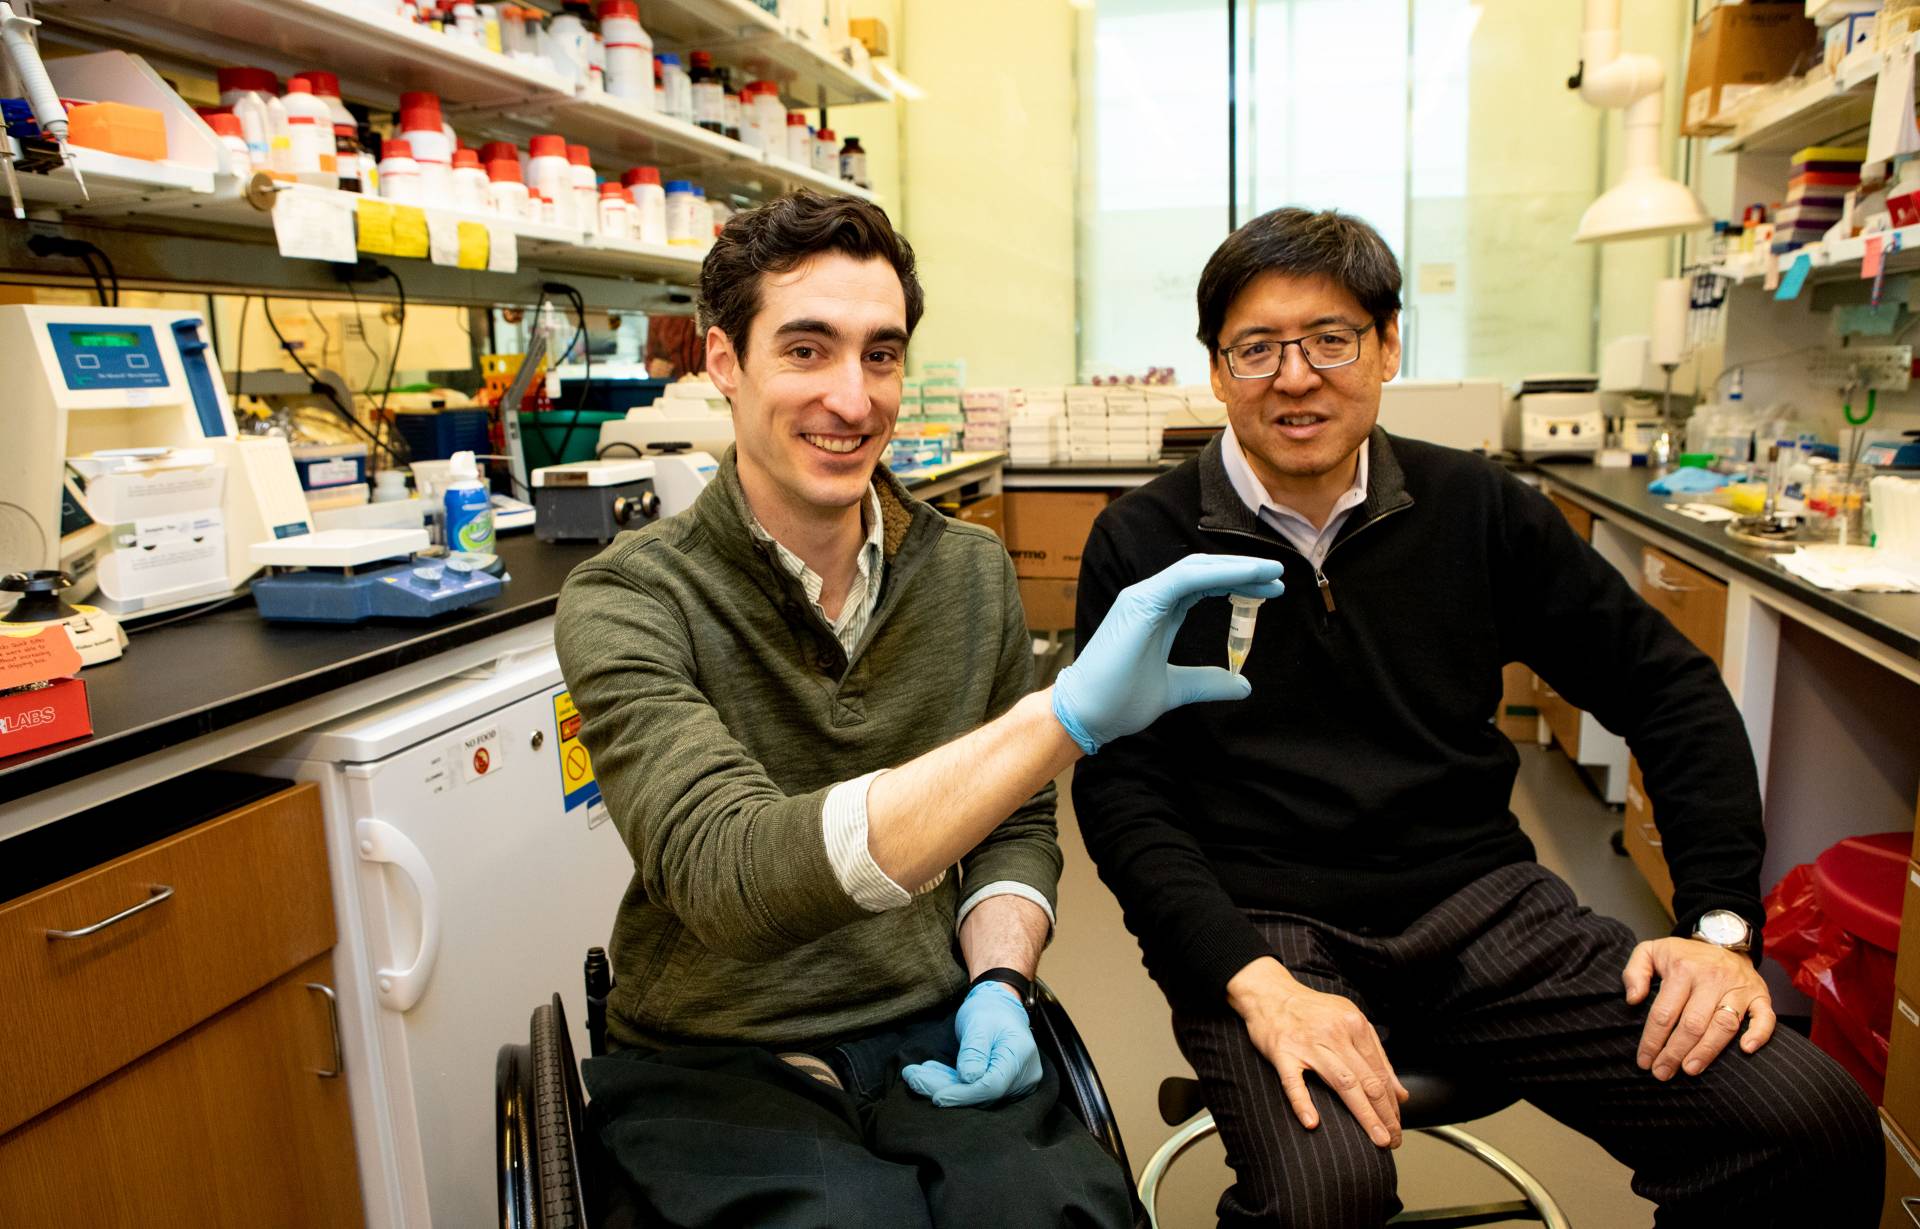 Tom Pisano and Sam Wang in lab